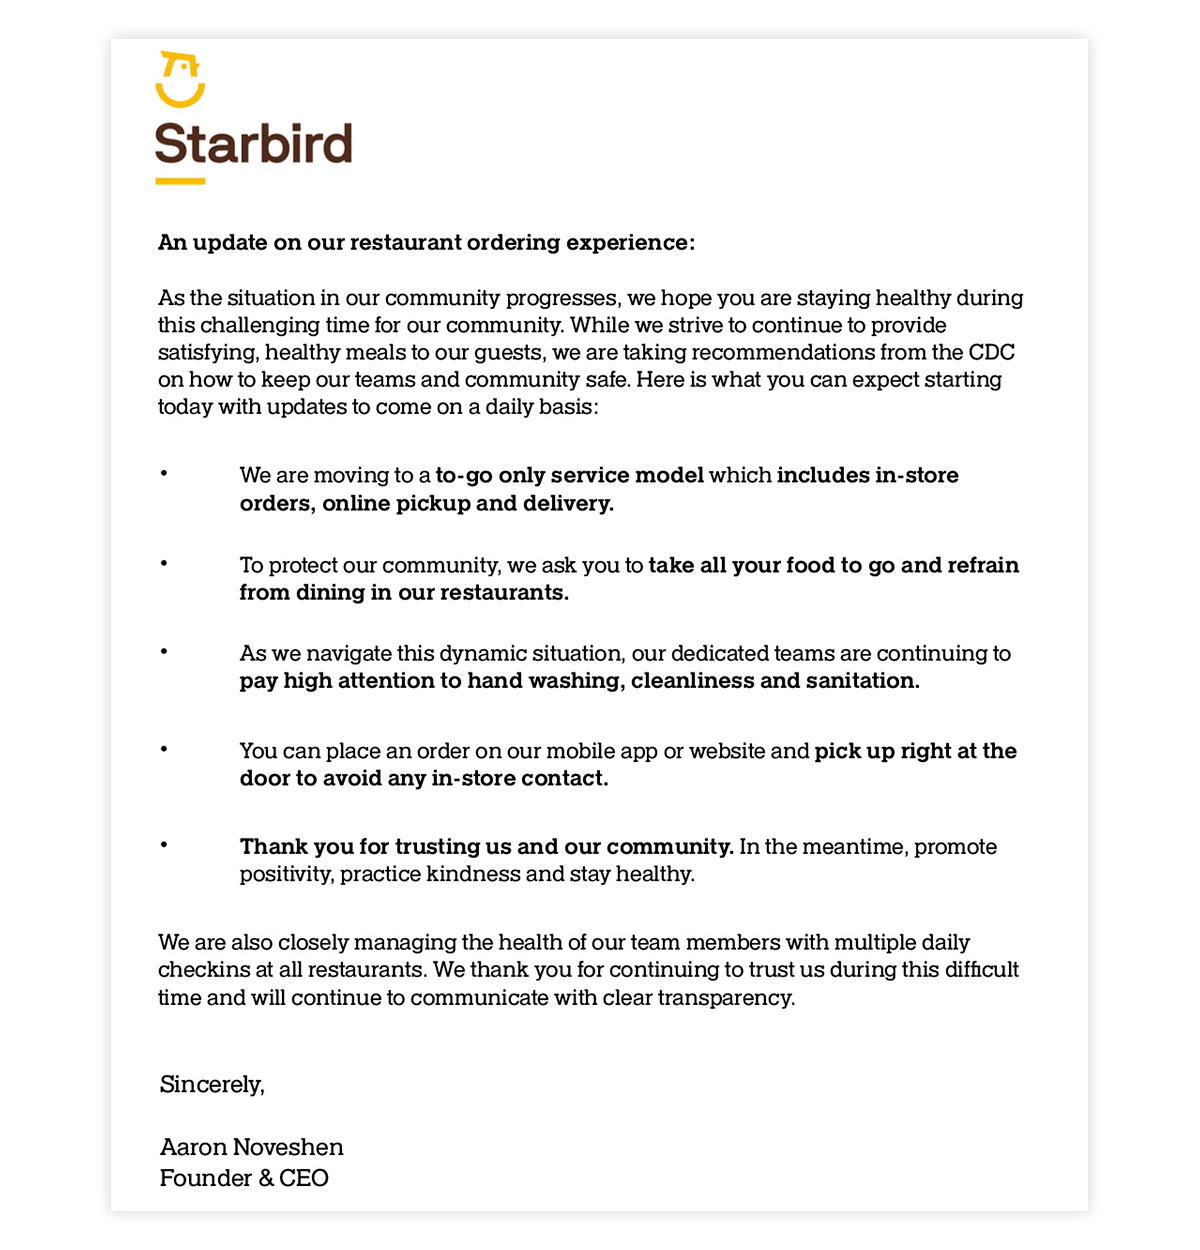 Starbird email clarifying available take-out, pick up and delivery channels.